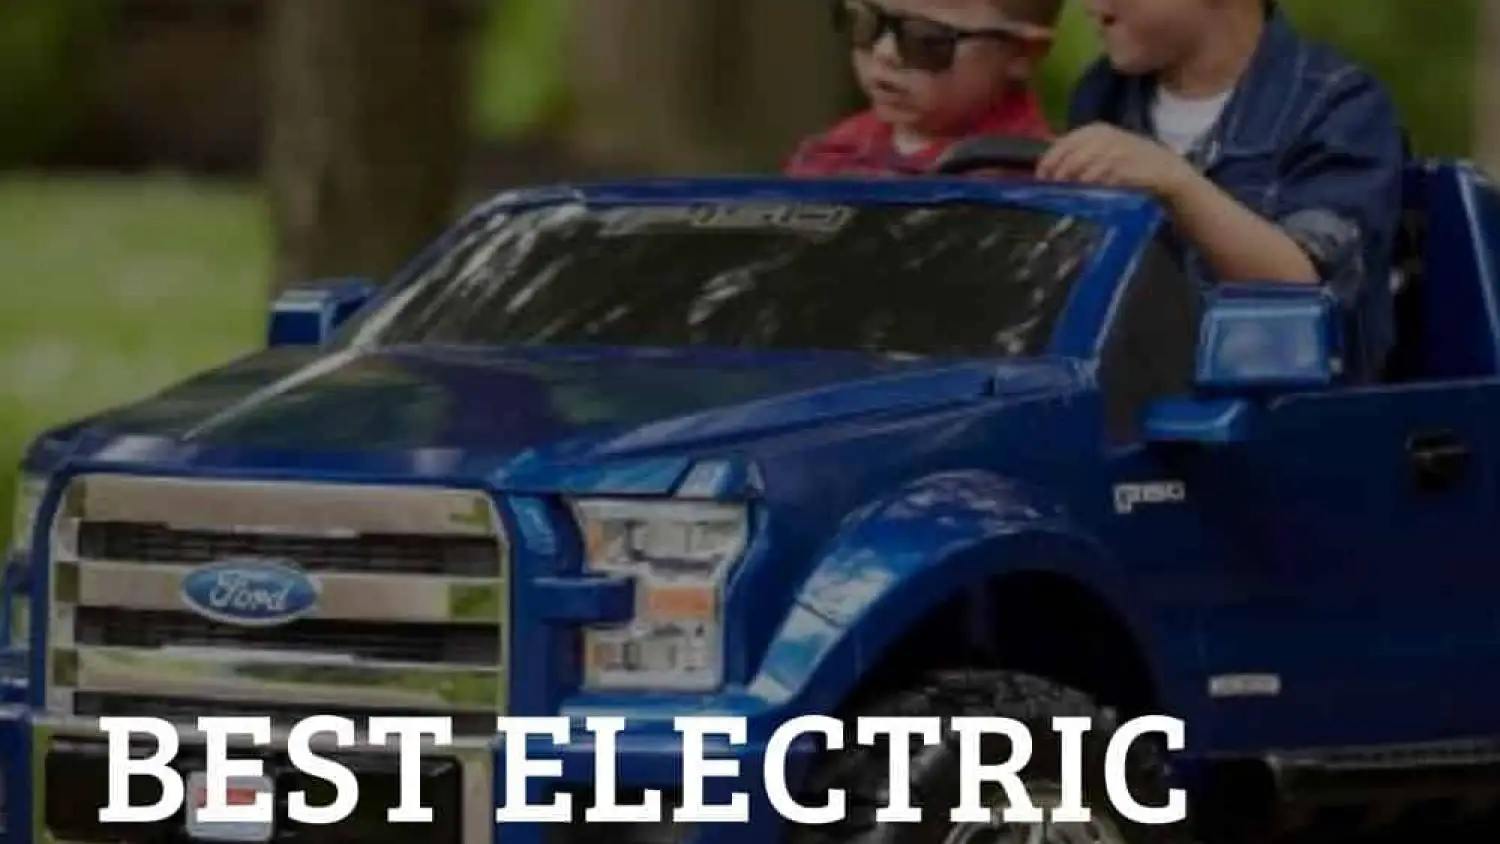 The 6 Best Electric Cars For Kids